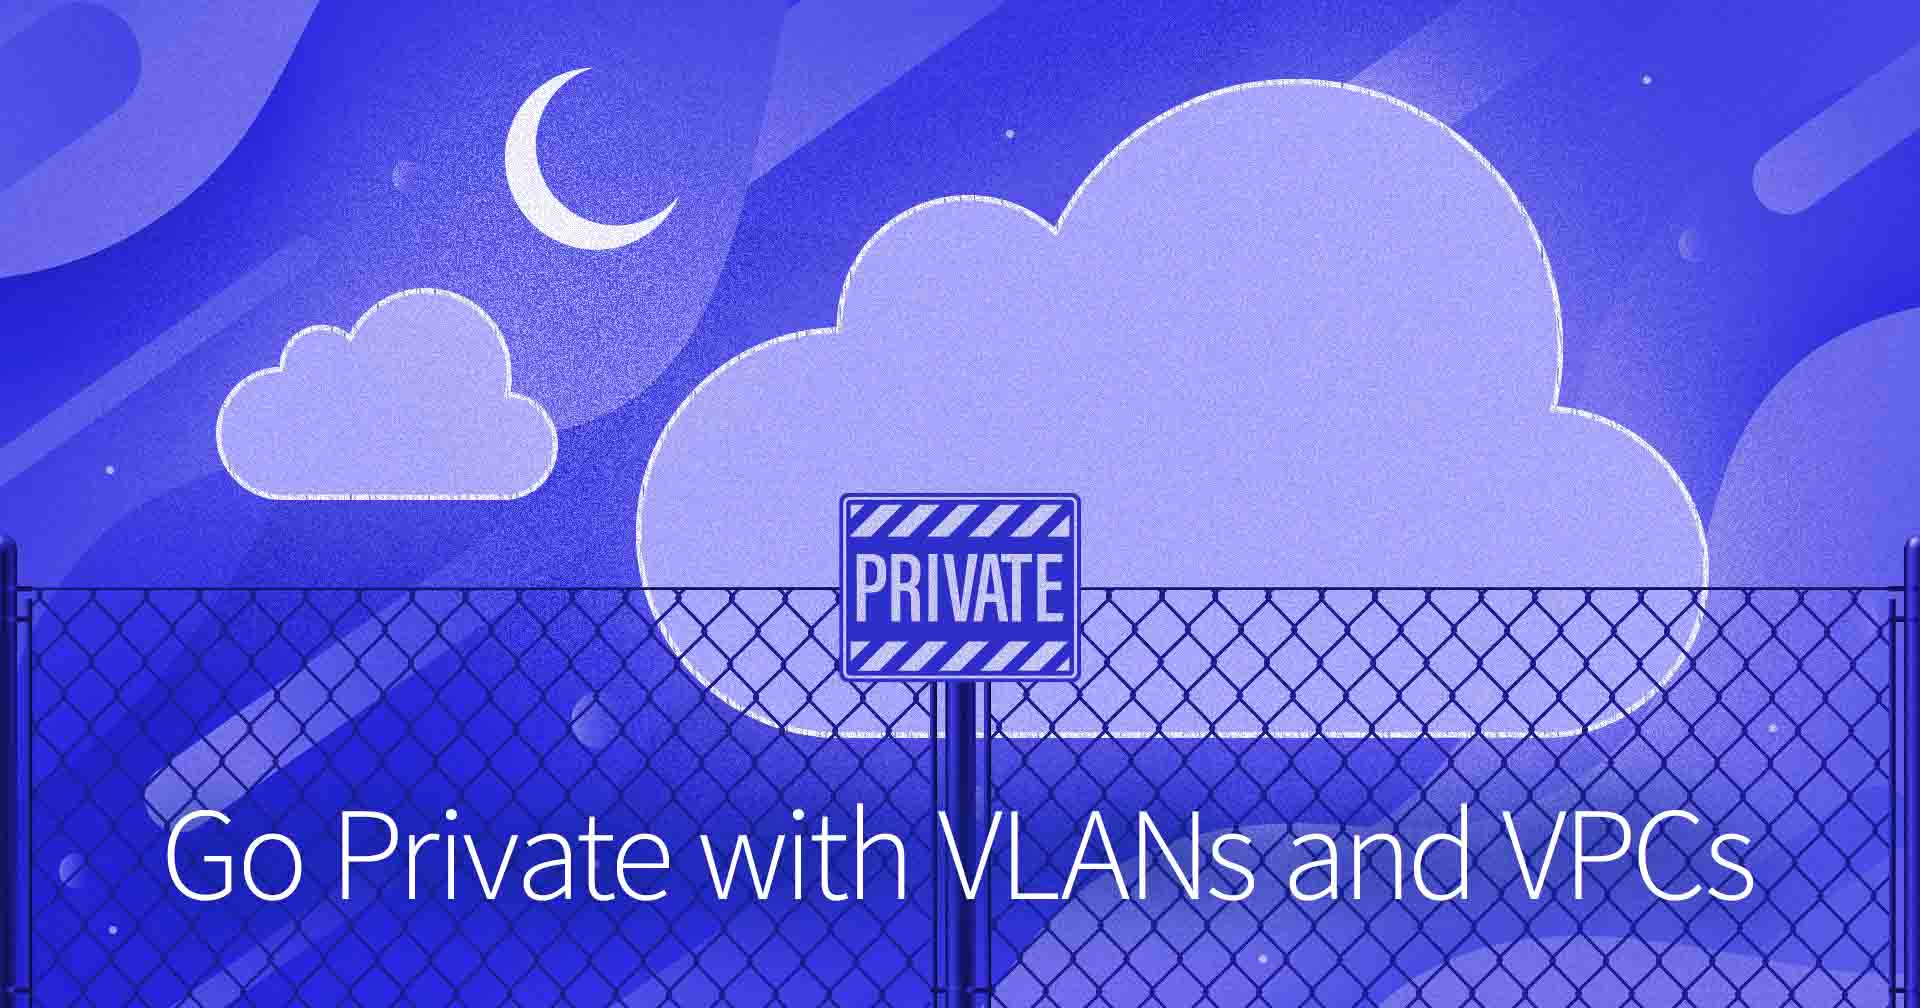 Go-Private-with-VLANs-and-VPCs